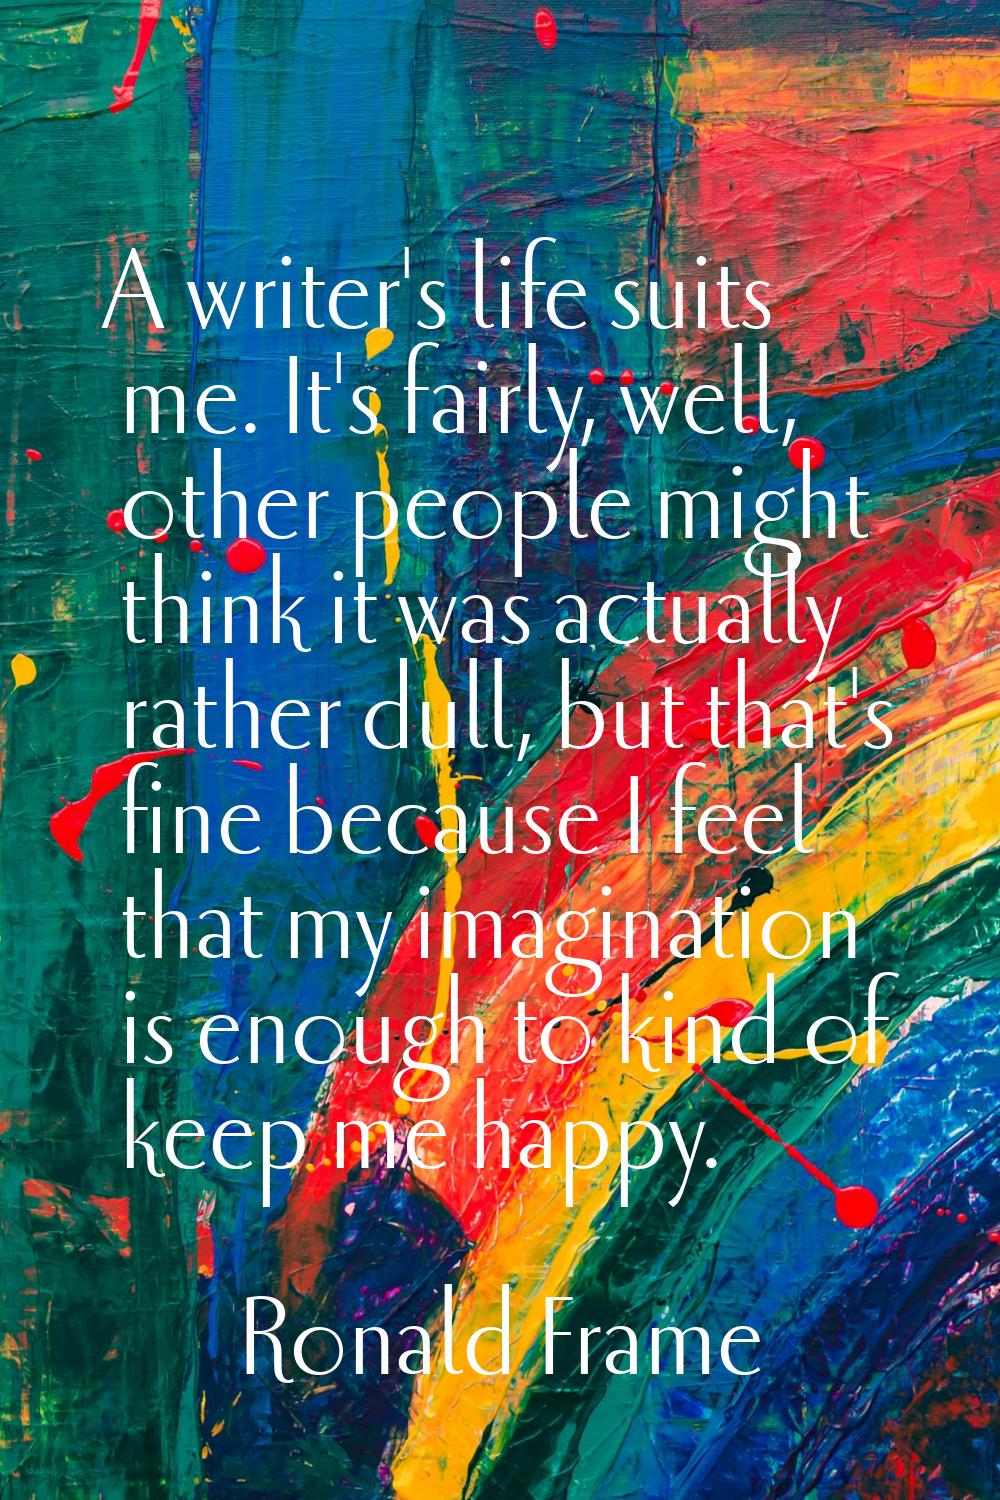 A writer's life suits me. It's fairly, well, other people might think it was actually rather dull, 